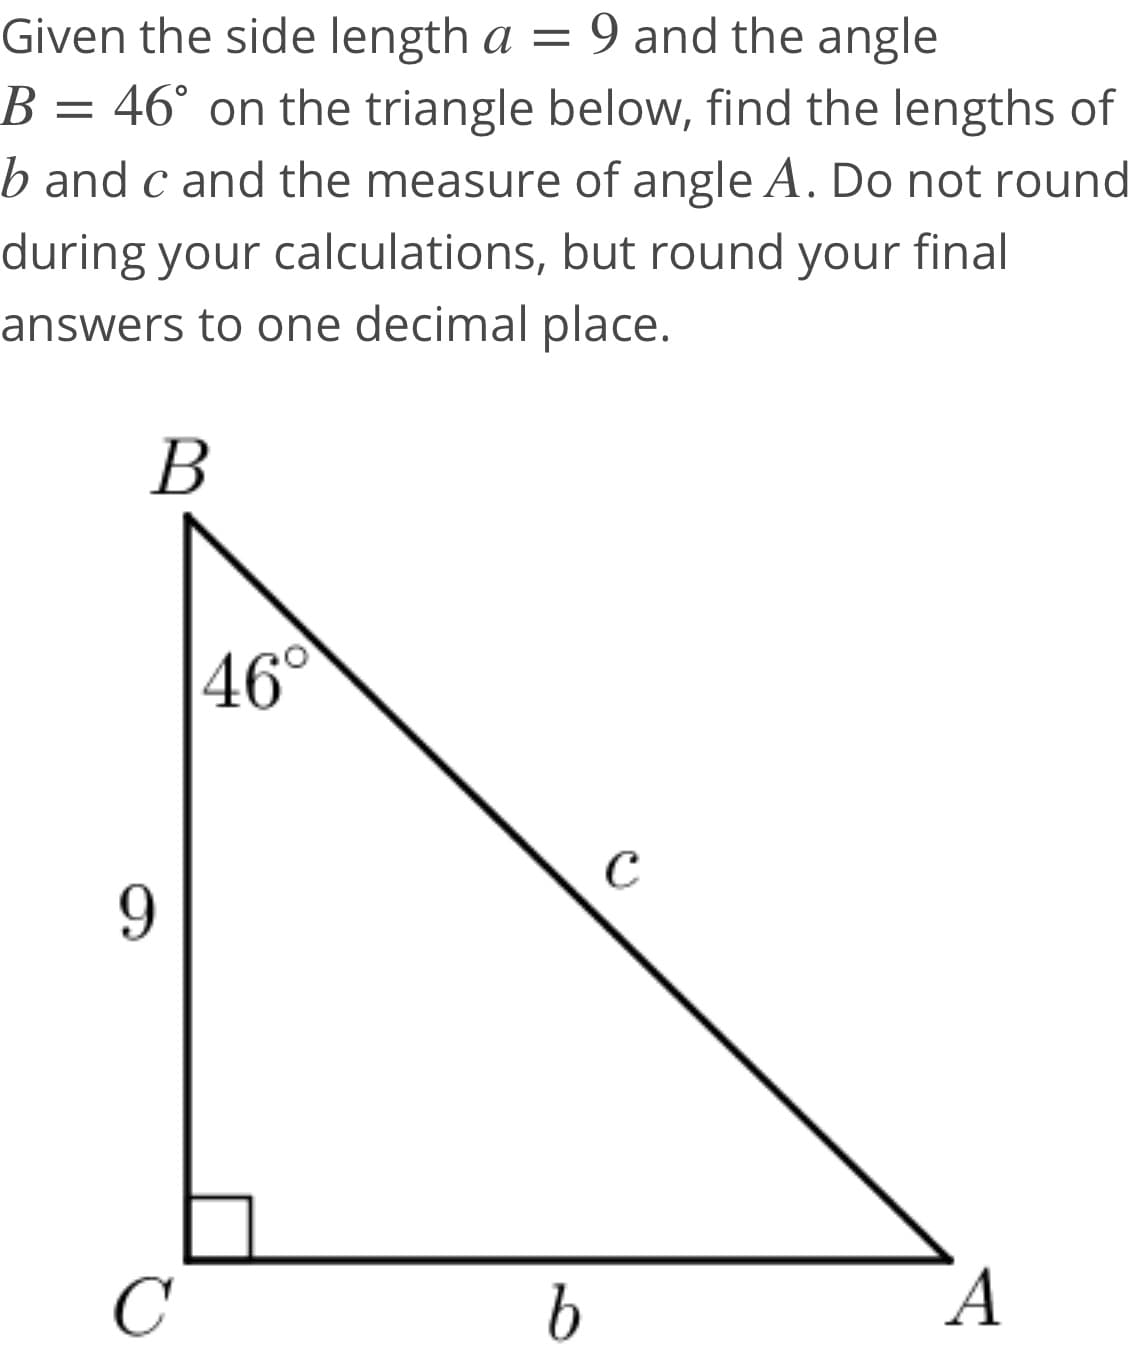 Given the side length a =
9 and the angle
B = 46° on the triangle below, find the lengths of
b and c and the measure of angle A. Do not round
during your calculations, but round your final
answers to one decimal place.
В
46°
C
9.
C
А
